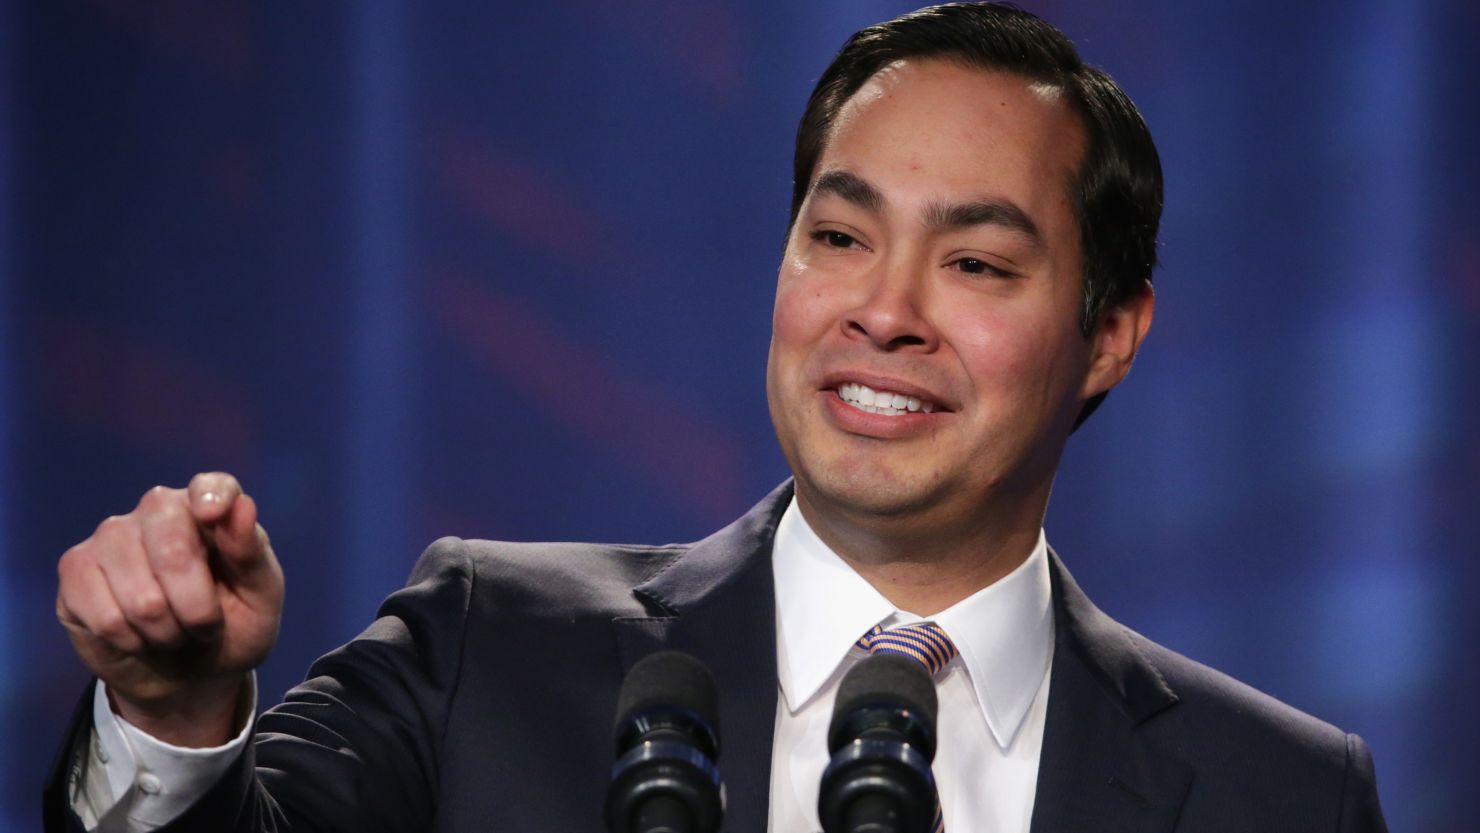 Julian Castro says he is "interested" in running for president in 2020.